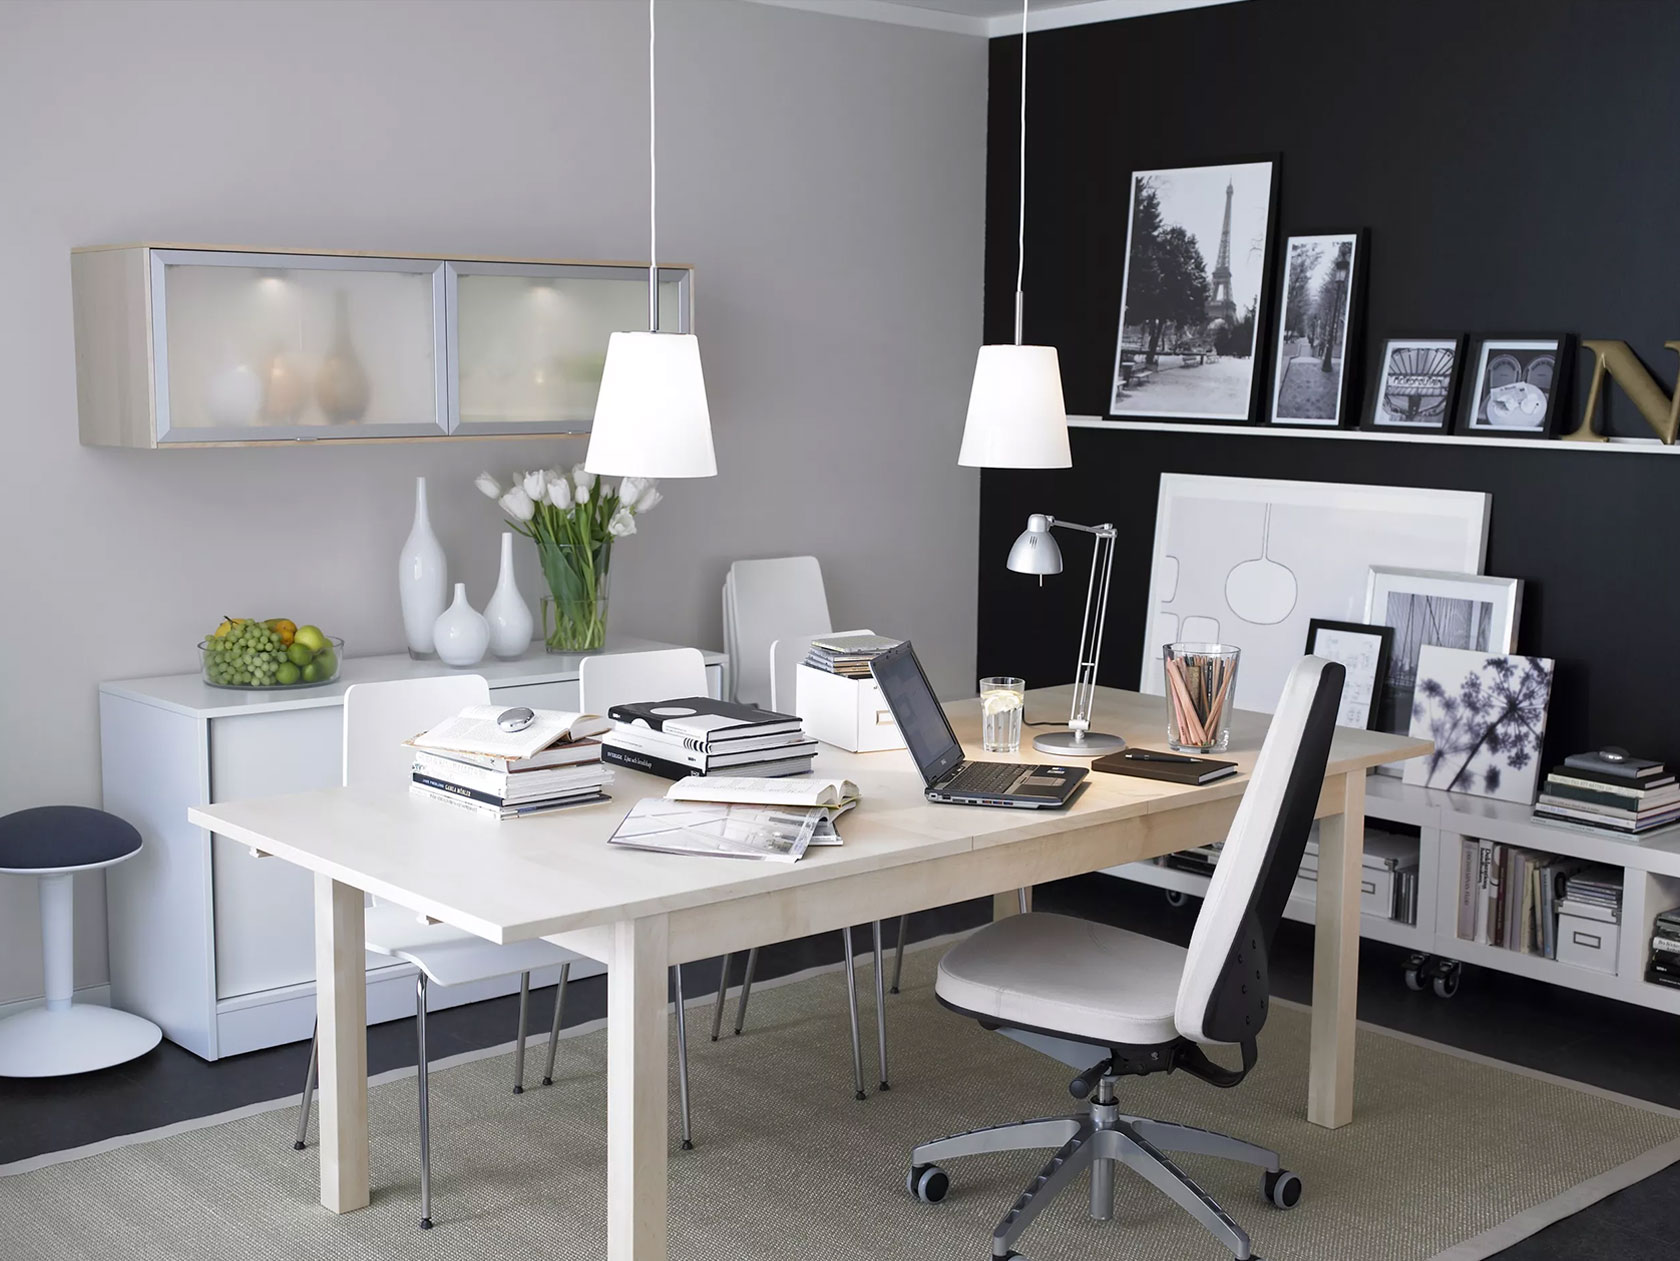 Interior Design Pictures on Interior Design Ideas  Walls  Desks   Lighting For Small Offices   My